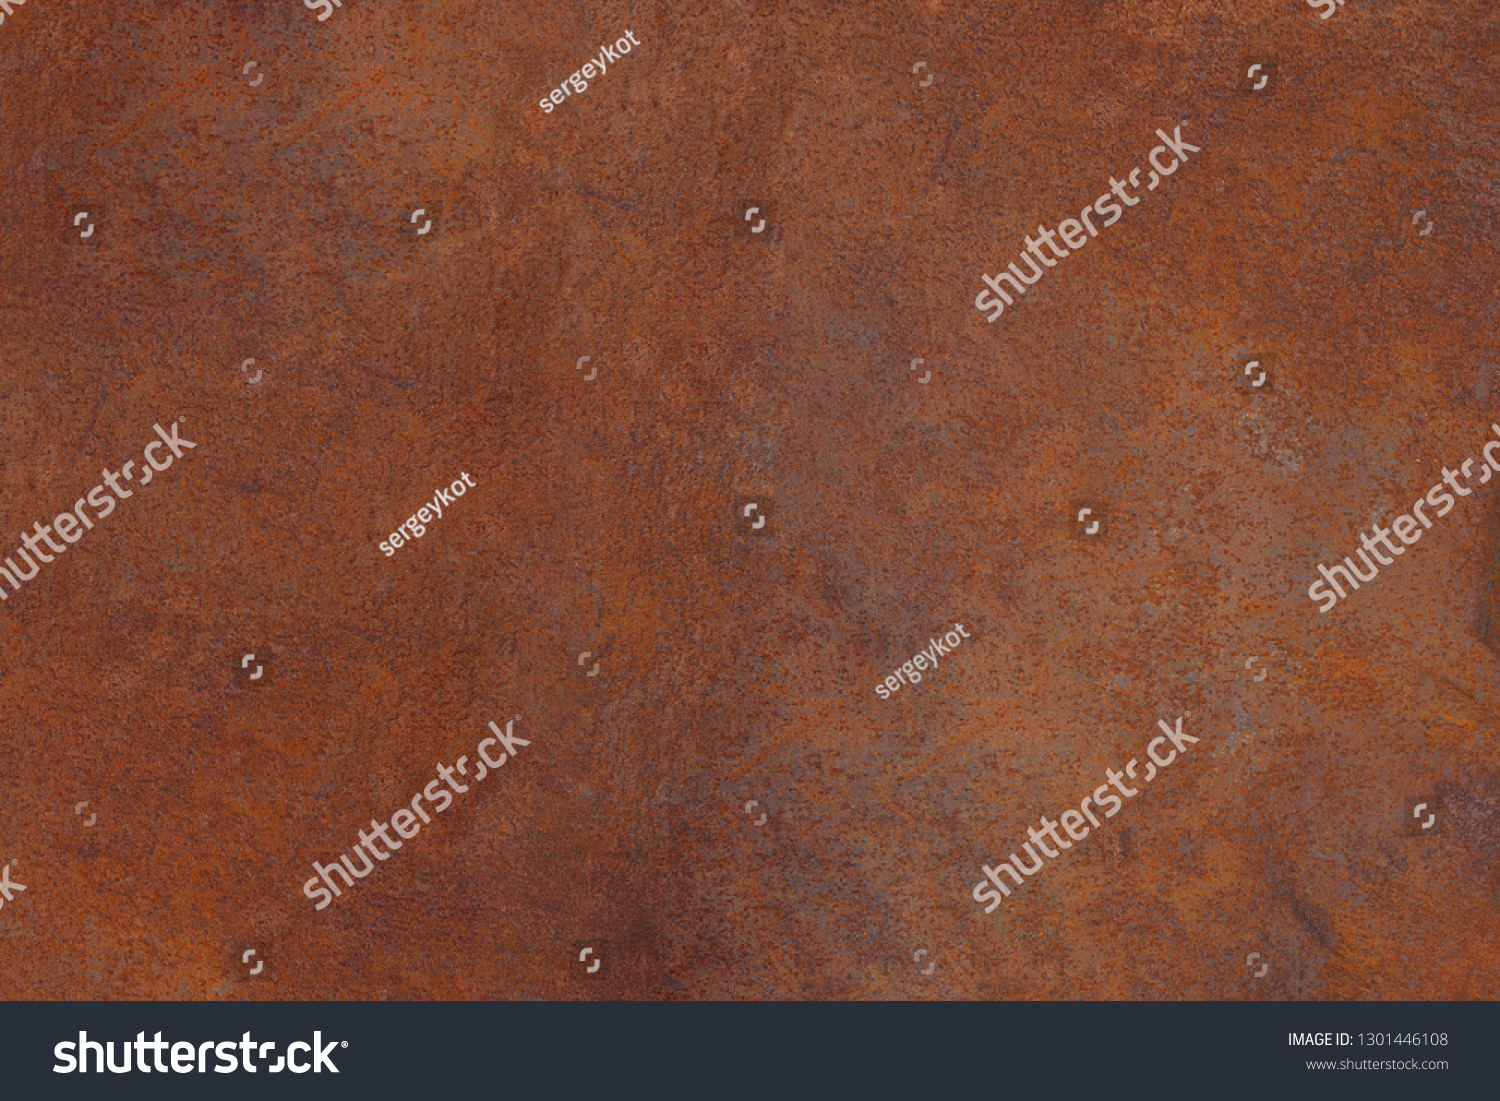 Grunge rusted metal texture, rust and oxidized metal background. Old metal iron panel.  #1301446108